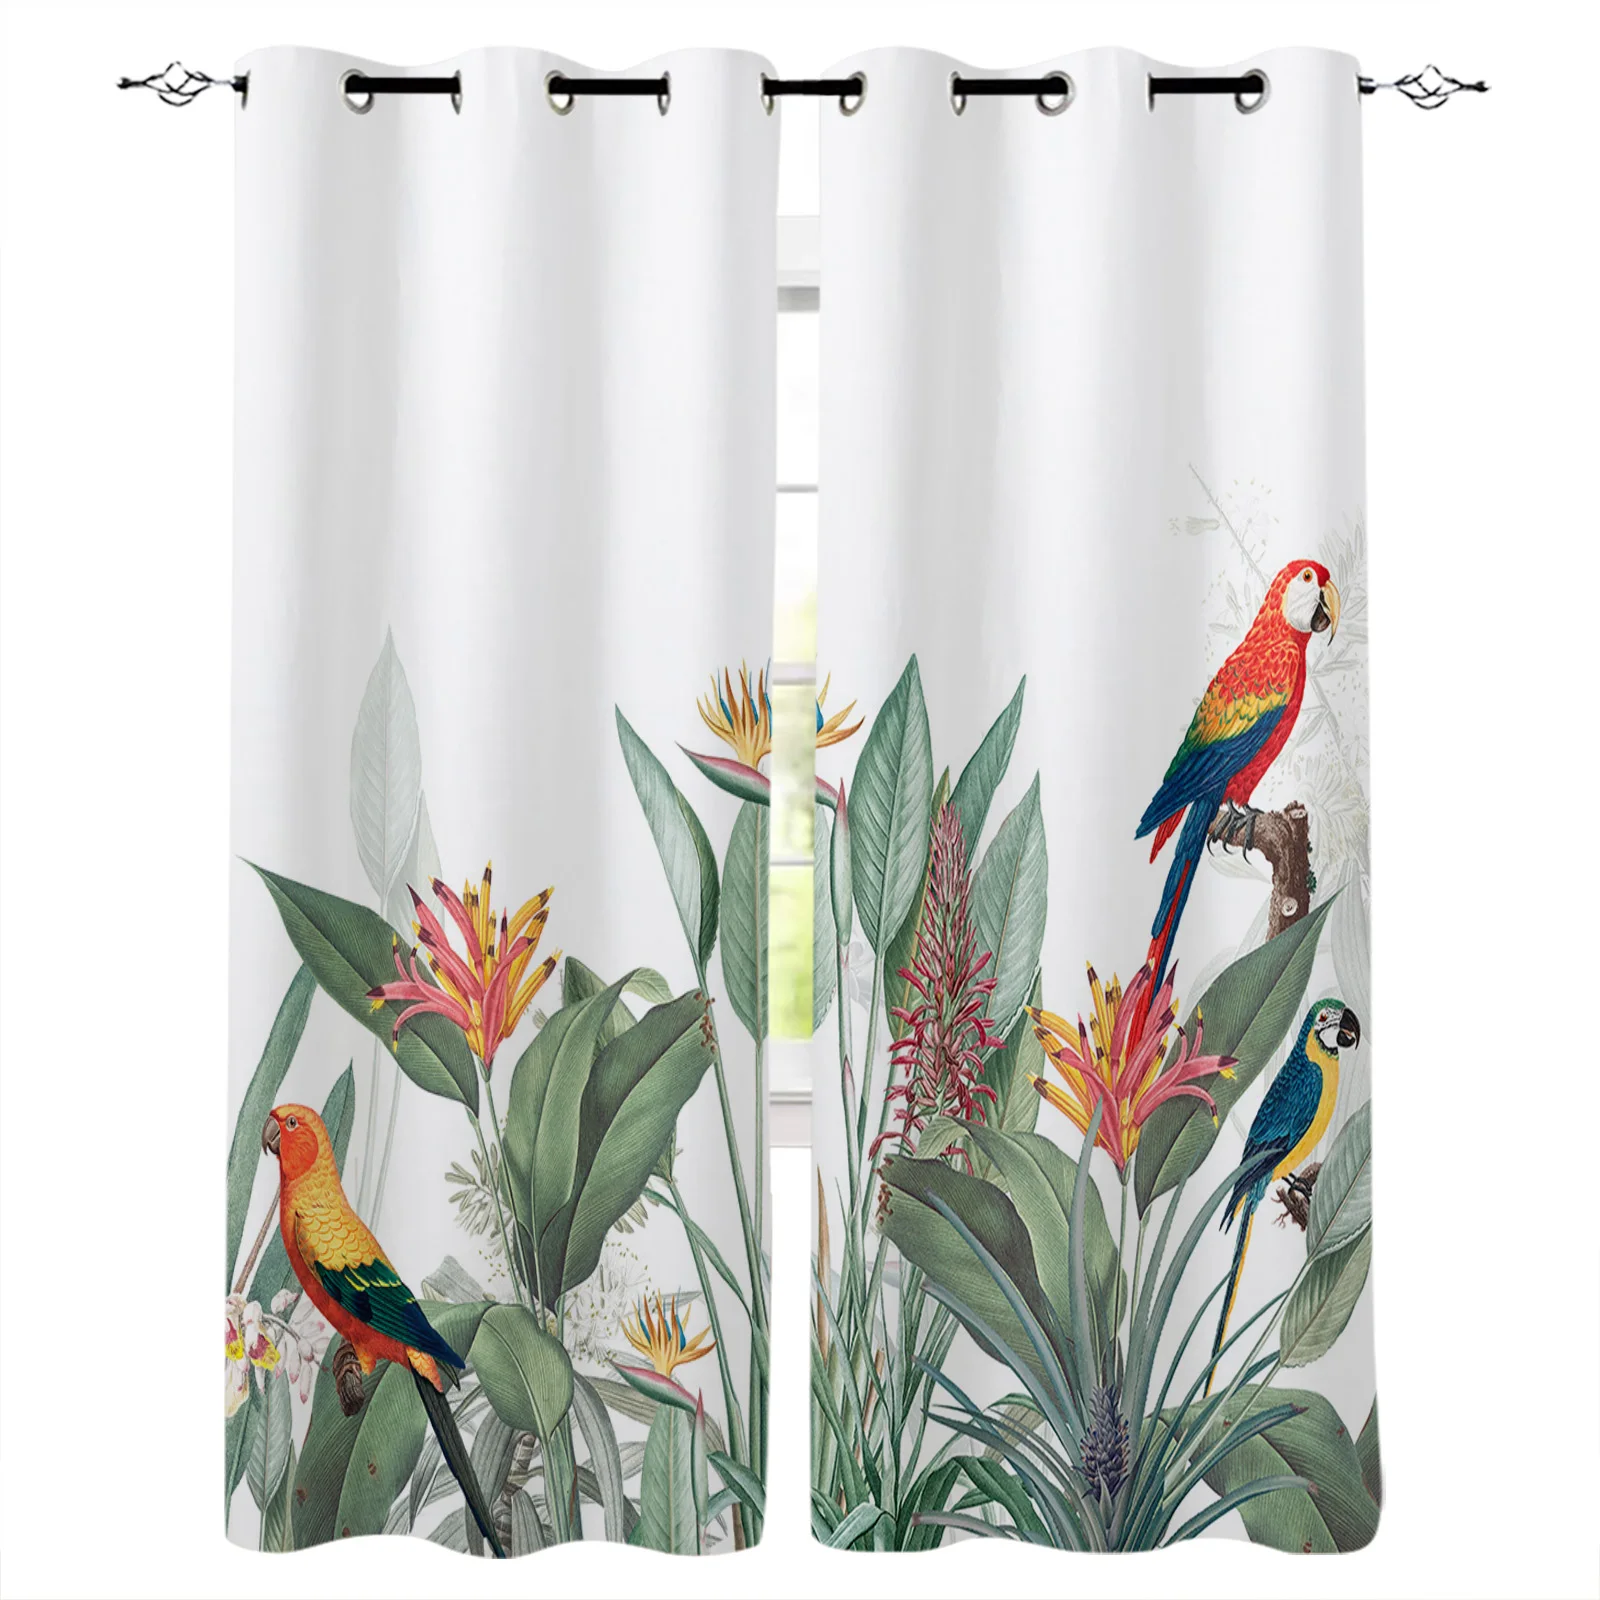 

Ins Style Tropical Plants Parrot Window Curtains for Living Room Bedroom Christmas Decor Kitchen Curtains Balcony Drapes